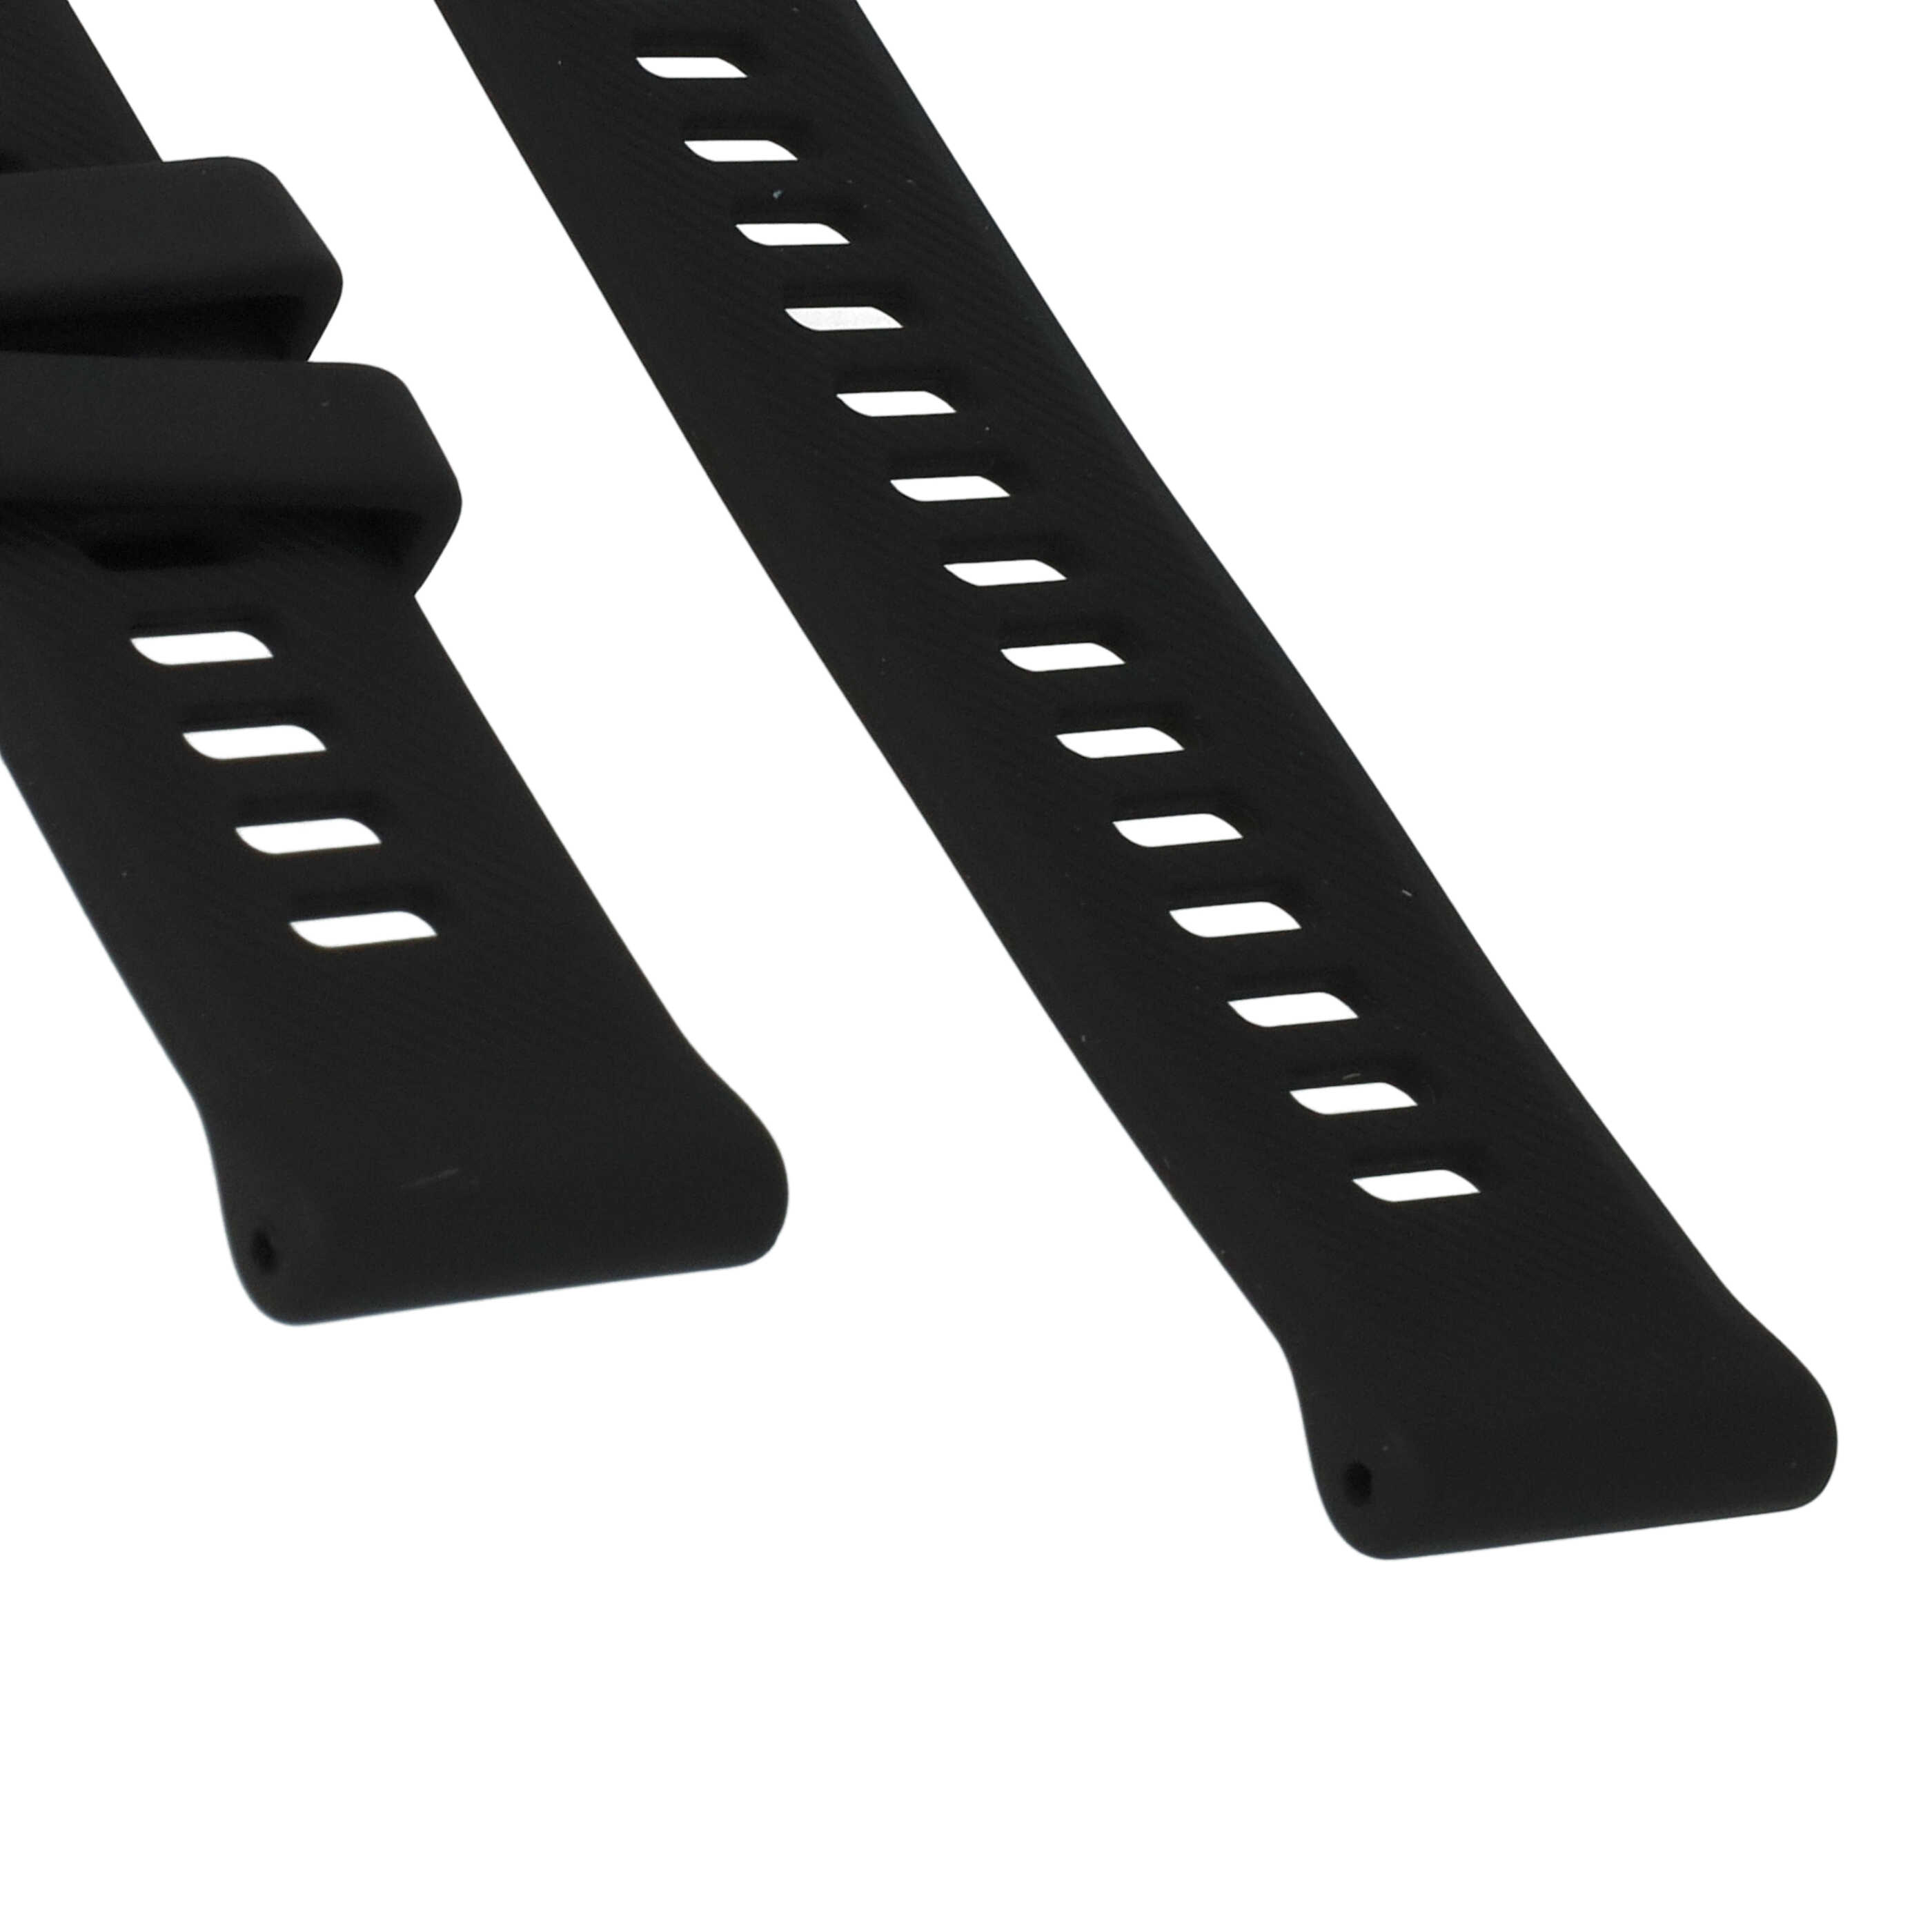 wristband for Garmin Forerunner Smartwatch - 9 + 12.2 cm long, 22mm wide, silicone, black